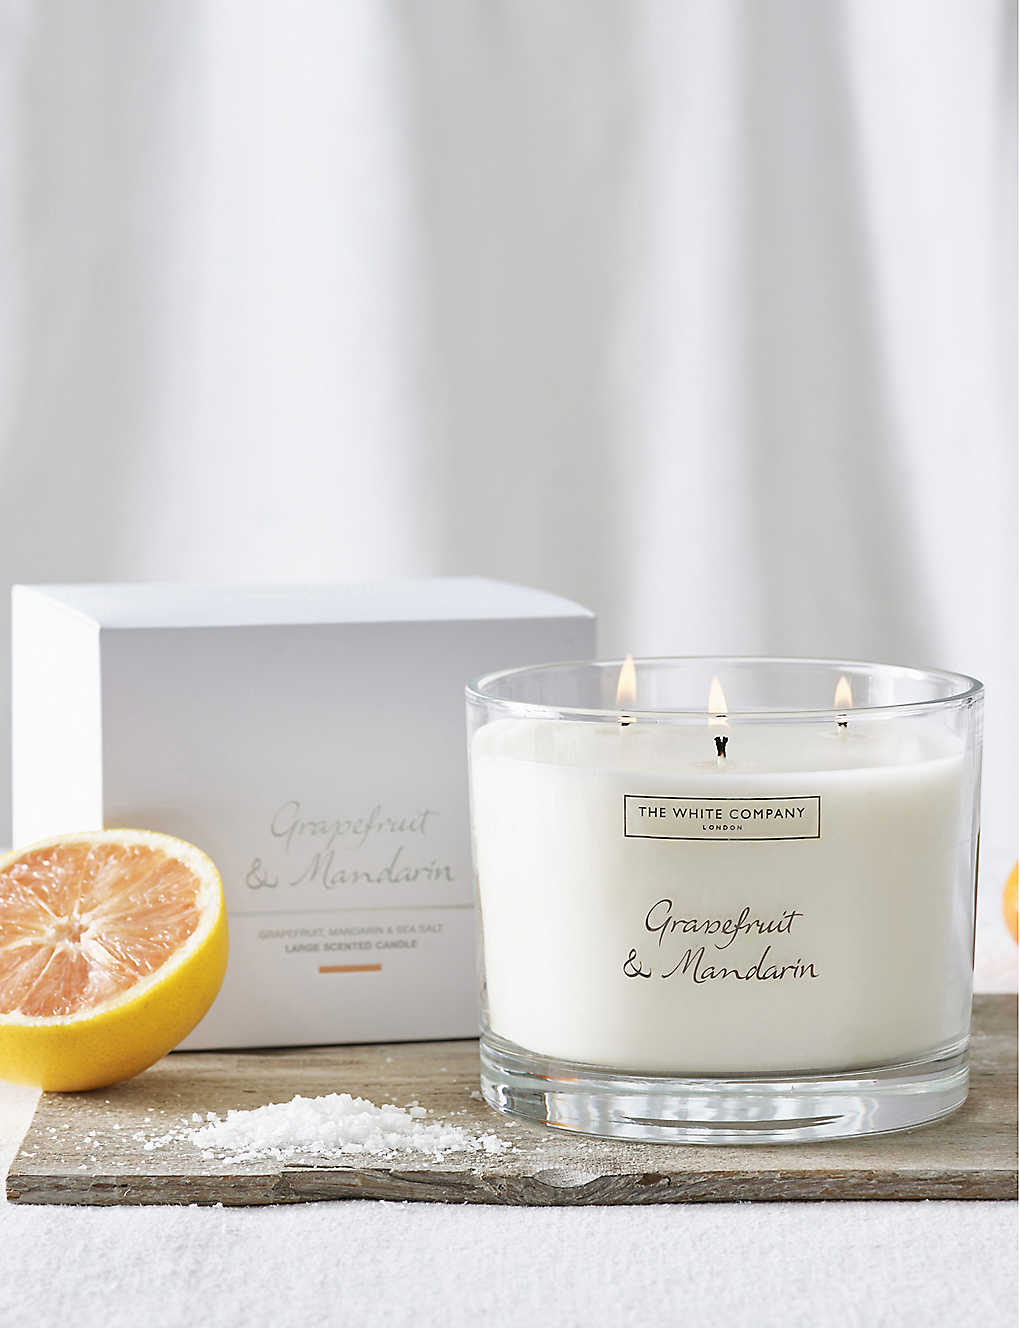 The White Company None/clear Grapefruit & Mandarin Large Scented Candle 770g